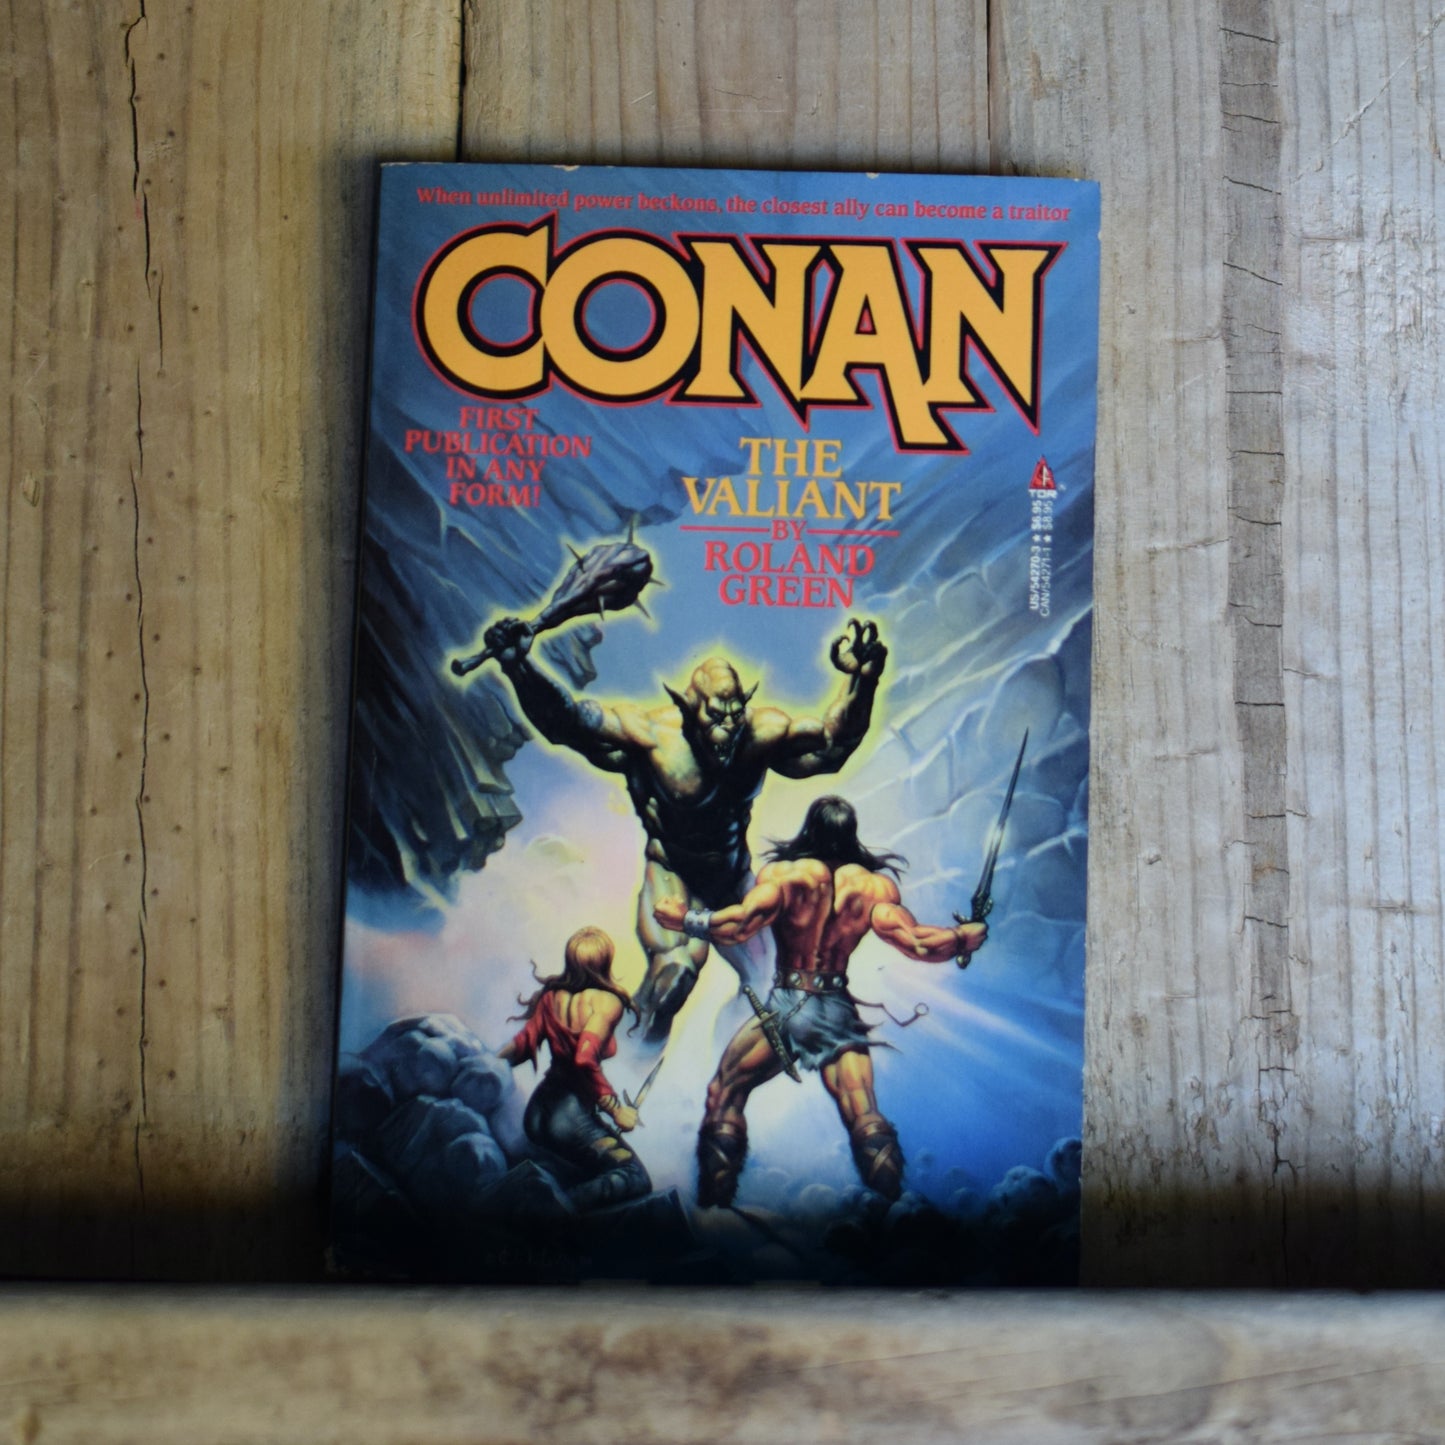 Vintage Fantasy Paperback: Roland Green - Conan The Valiant SIGNED FIRST EDITION/PRINTING